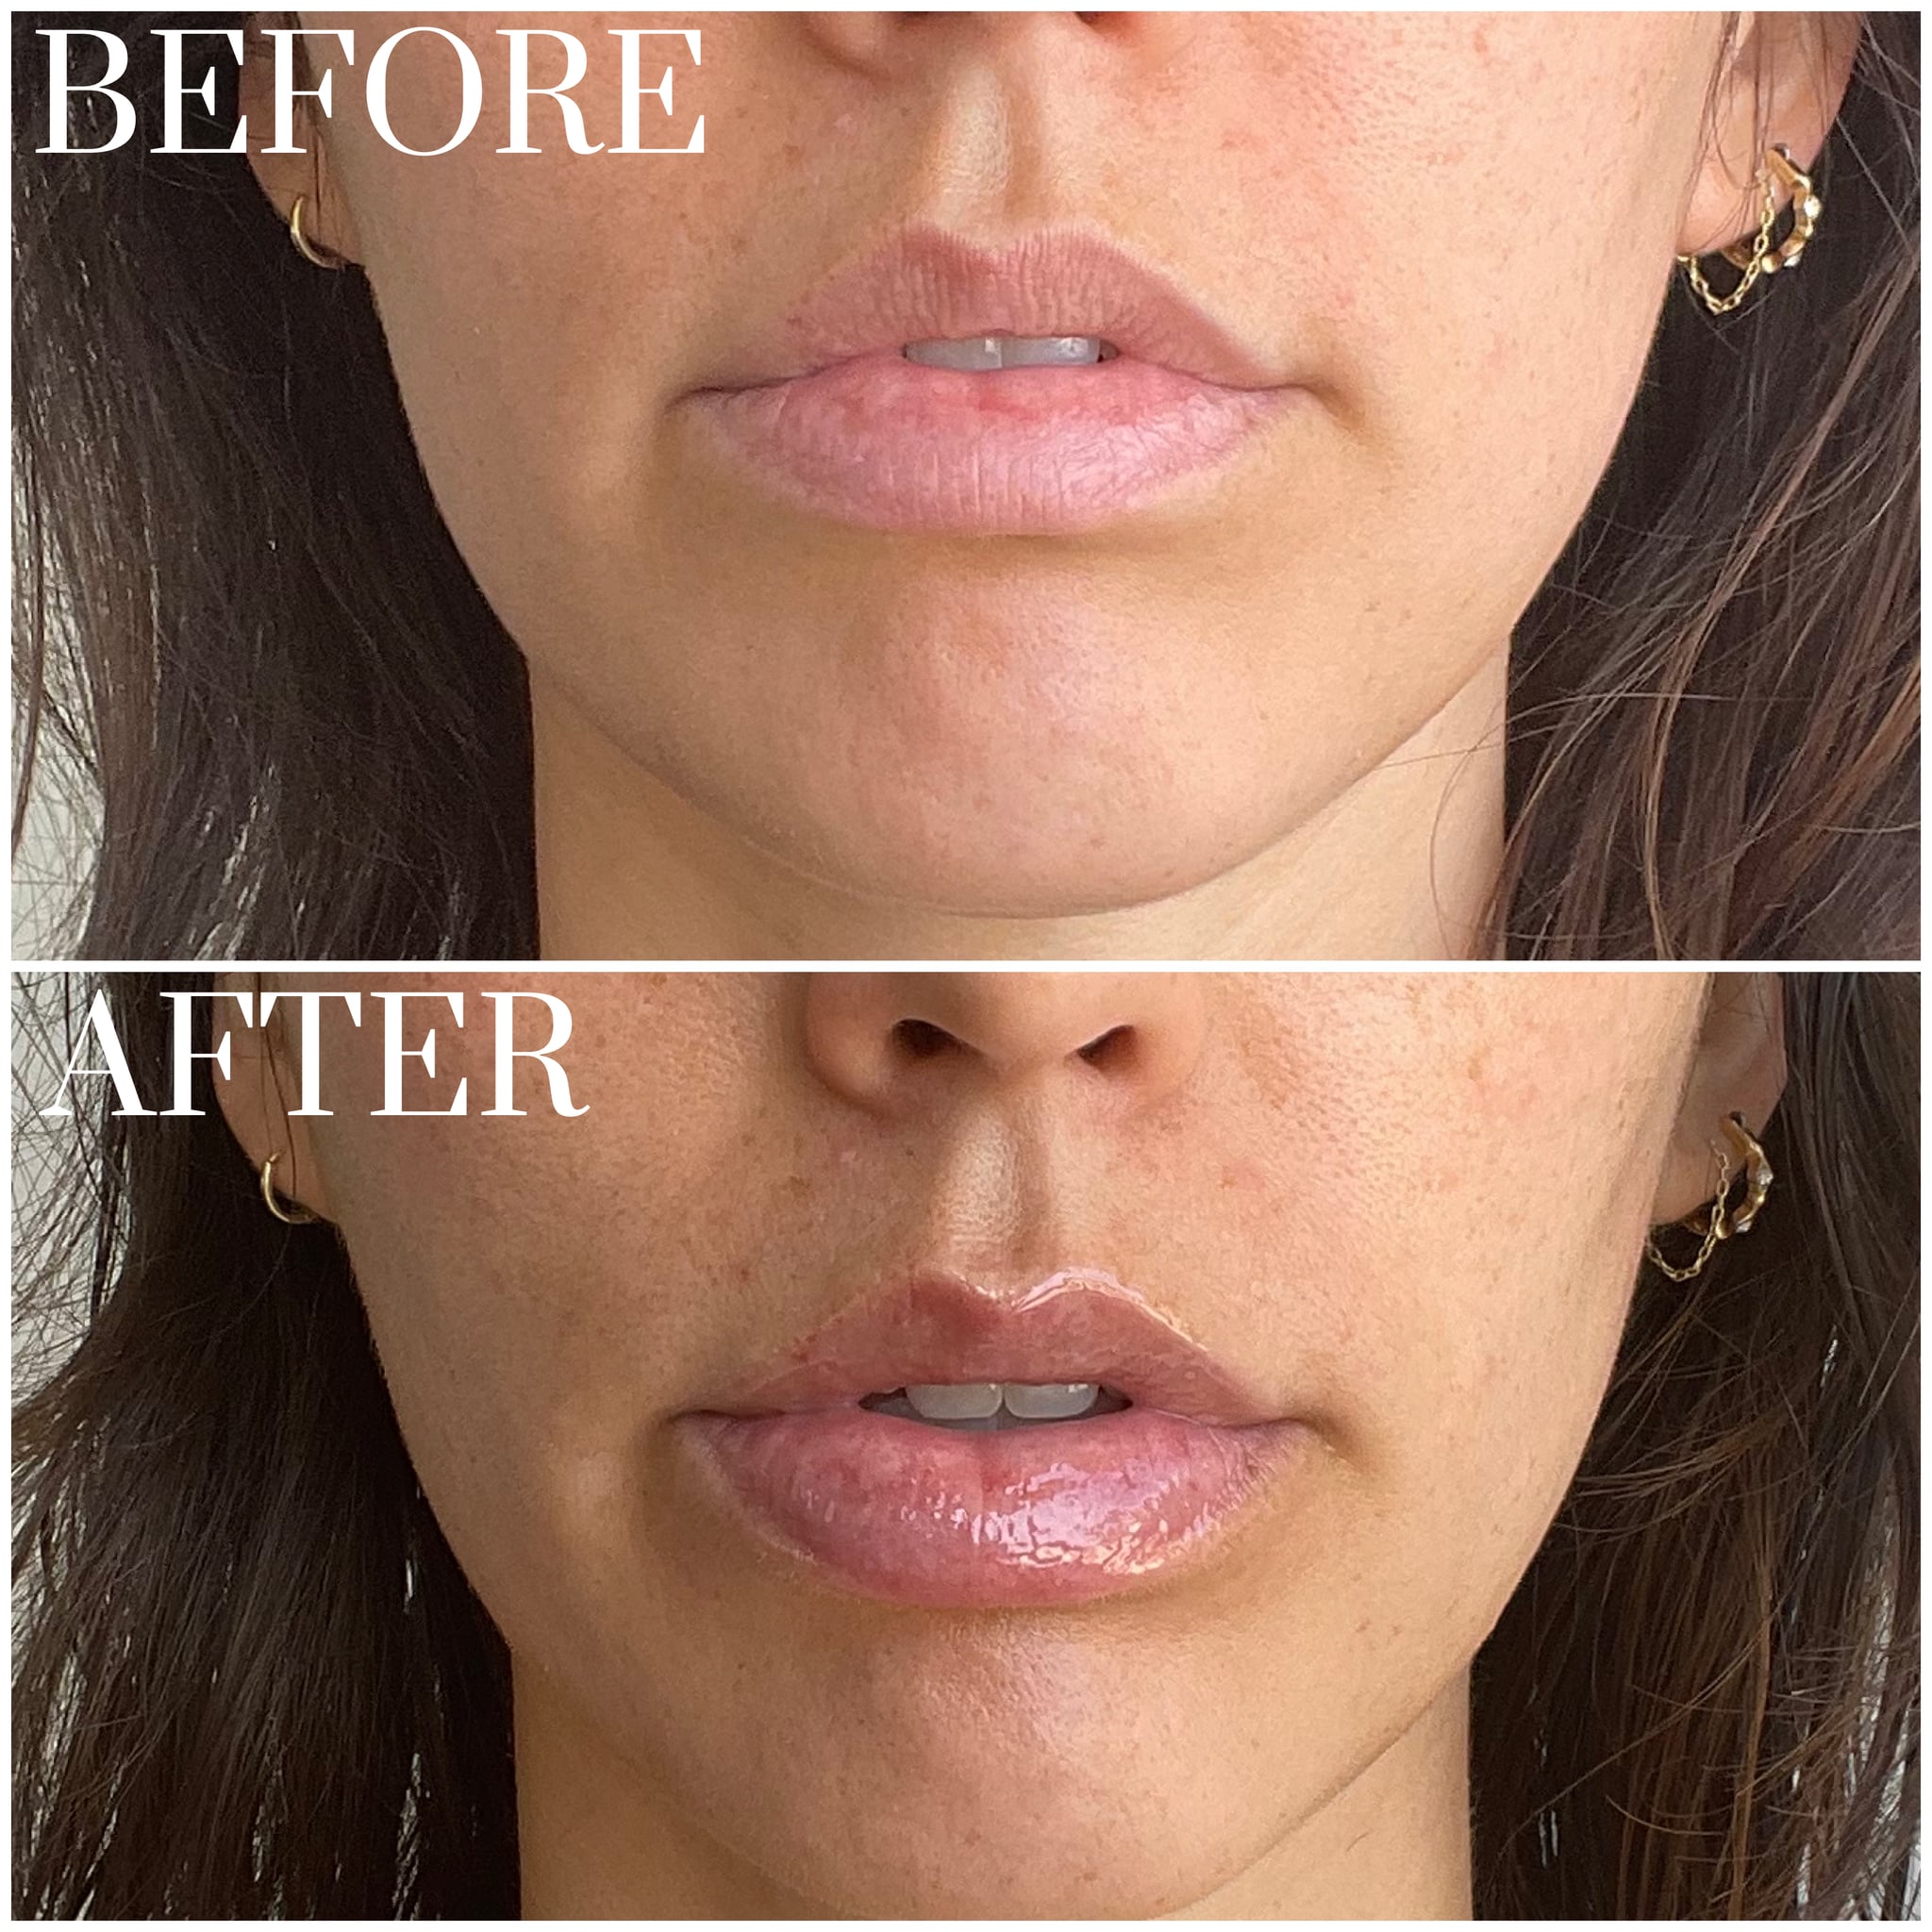 Rhode Peptide Lip Treatment Review With Photos | POPSUGAR Beauty UK